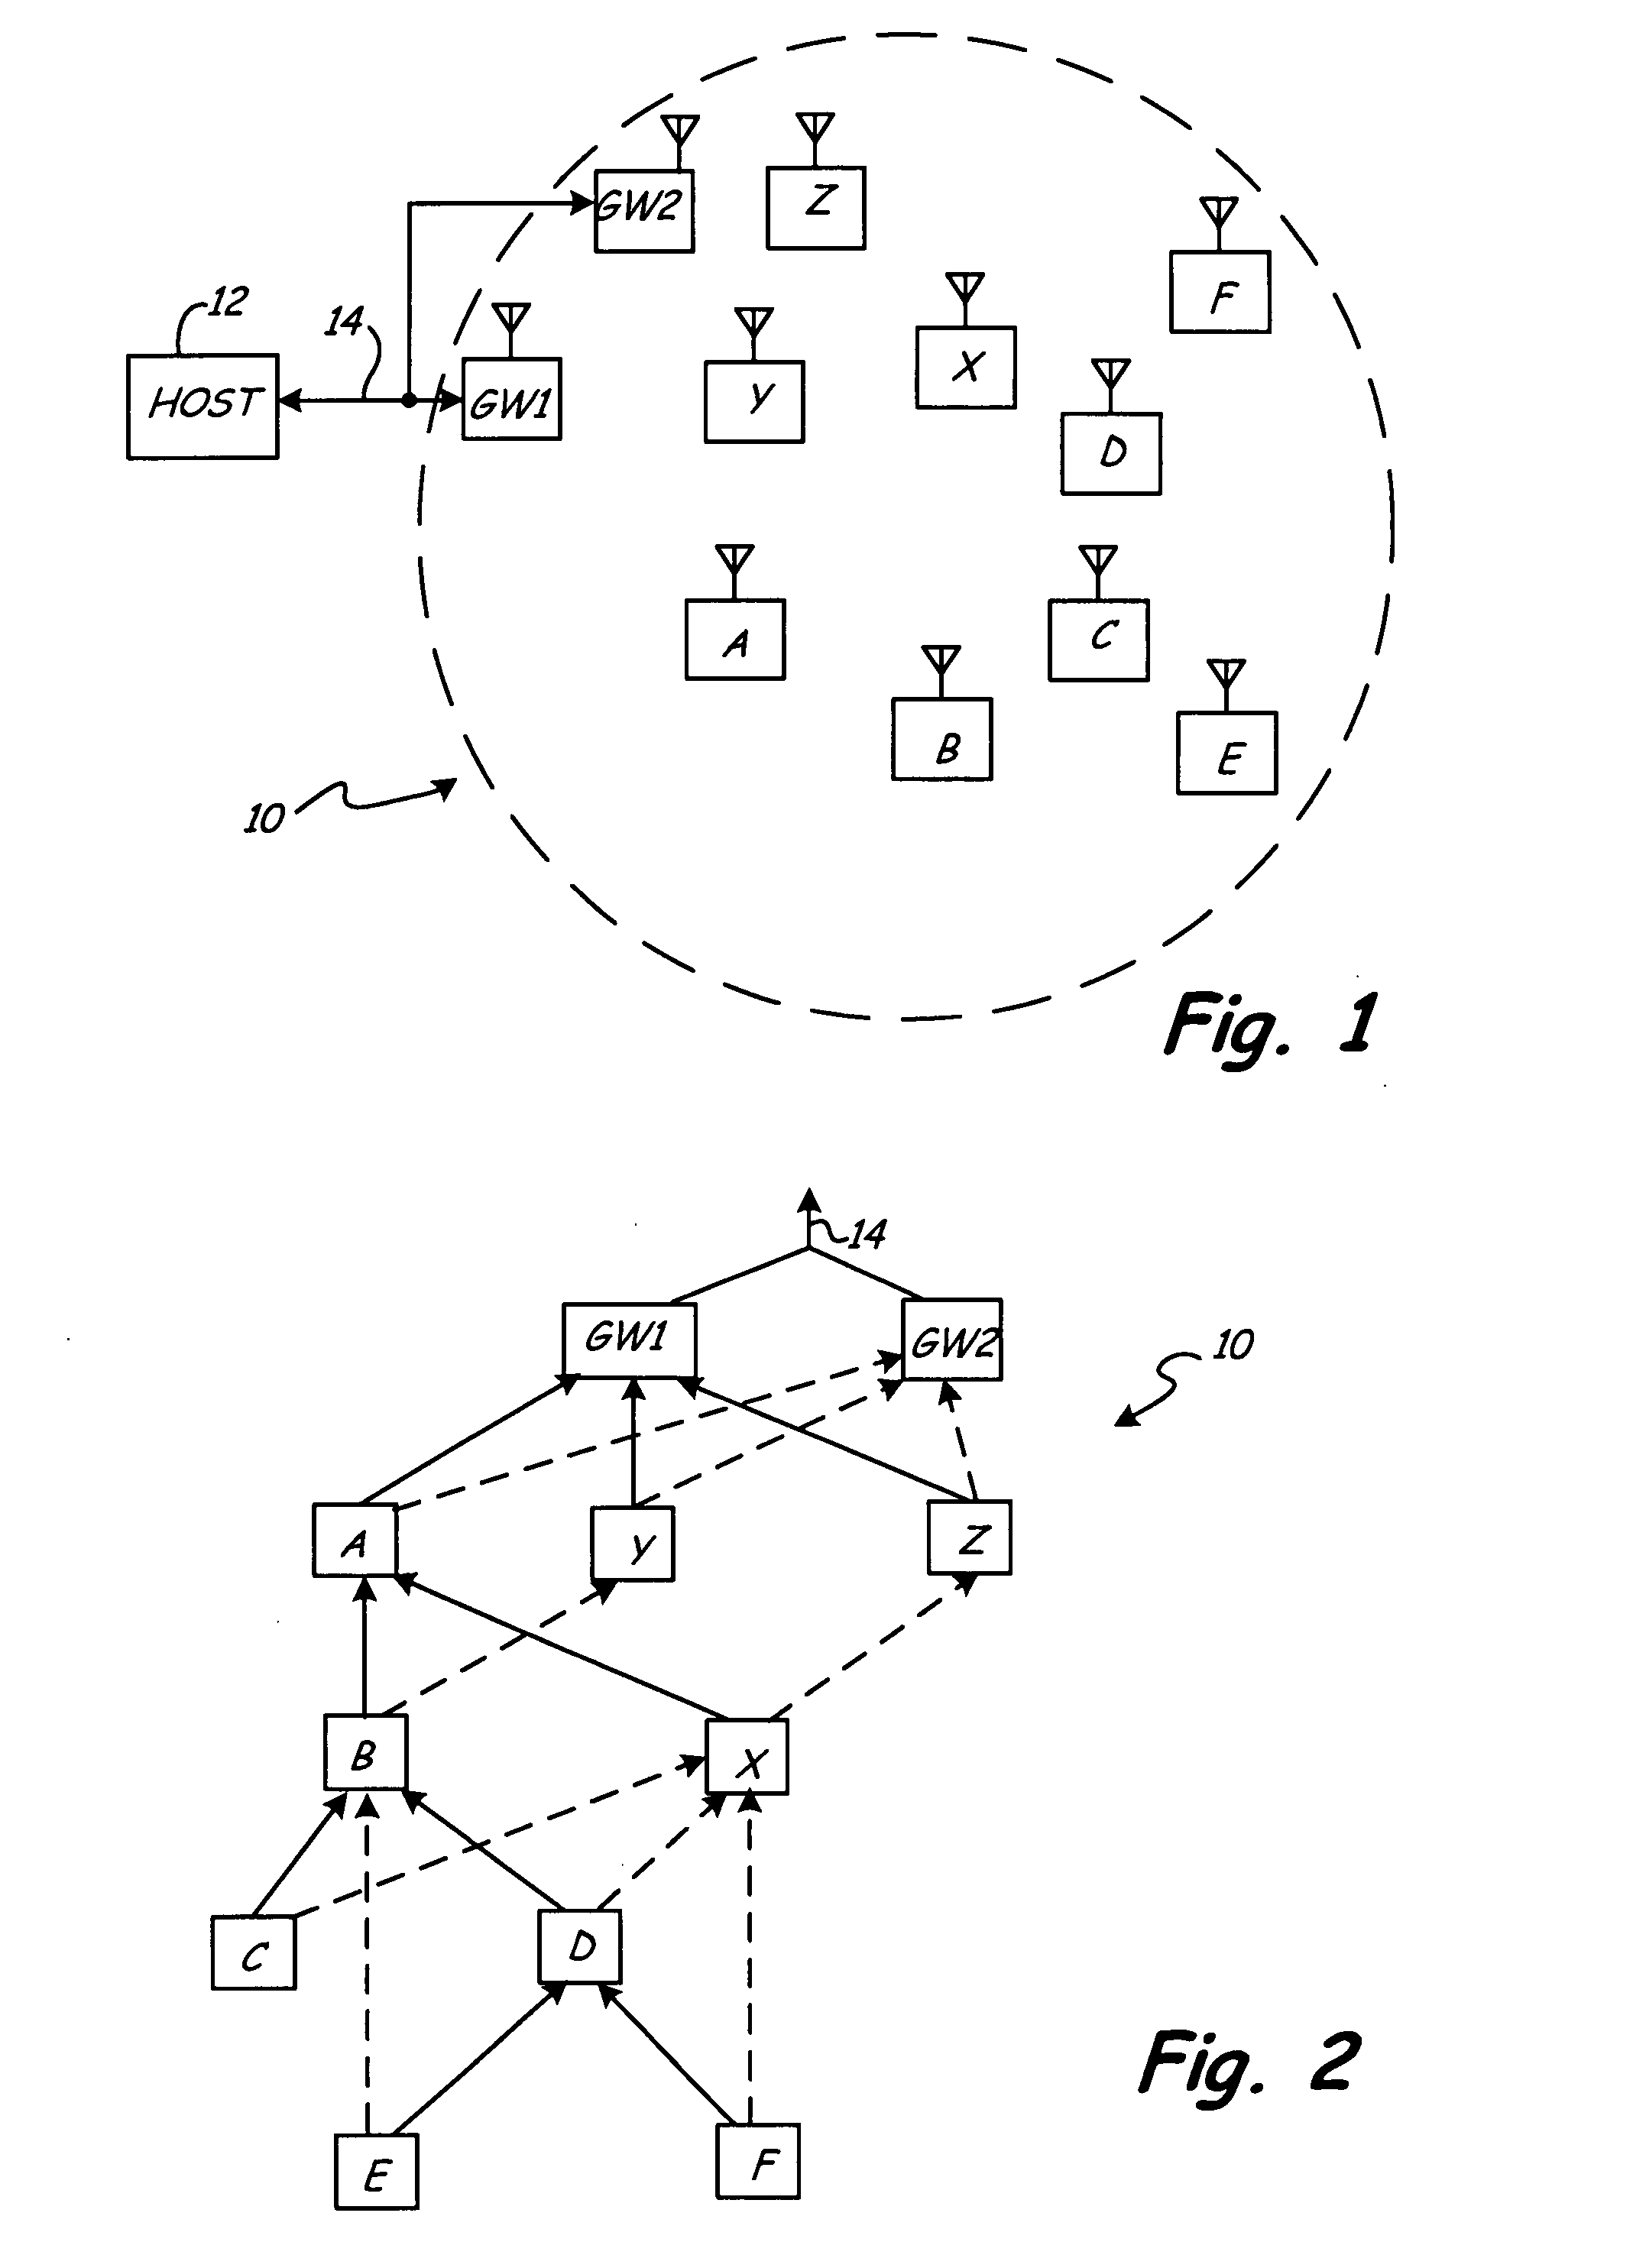 Wireless mesh network with locally activated fast active scheduling of wireless messages